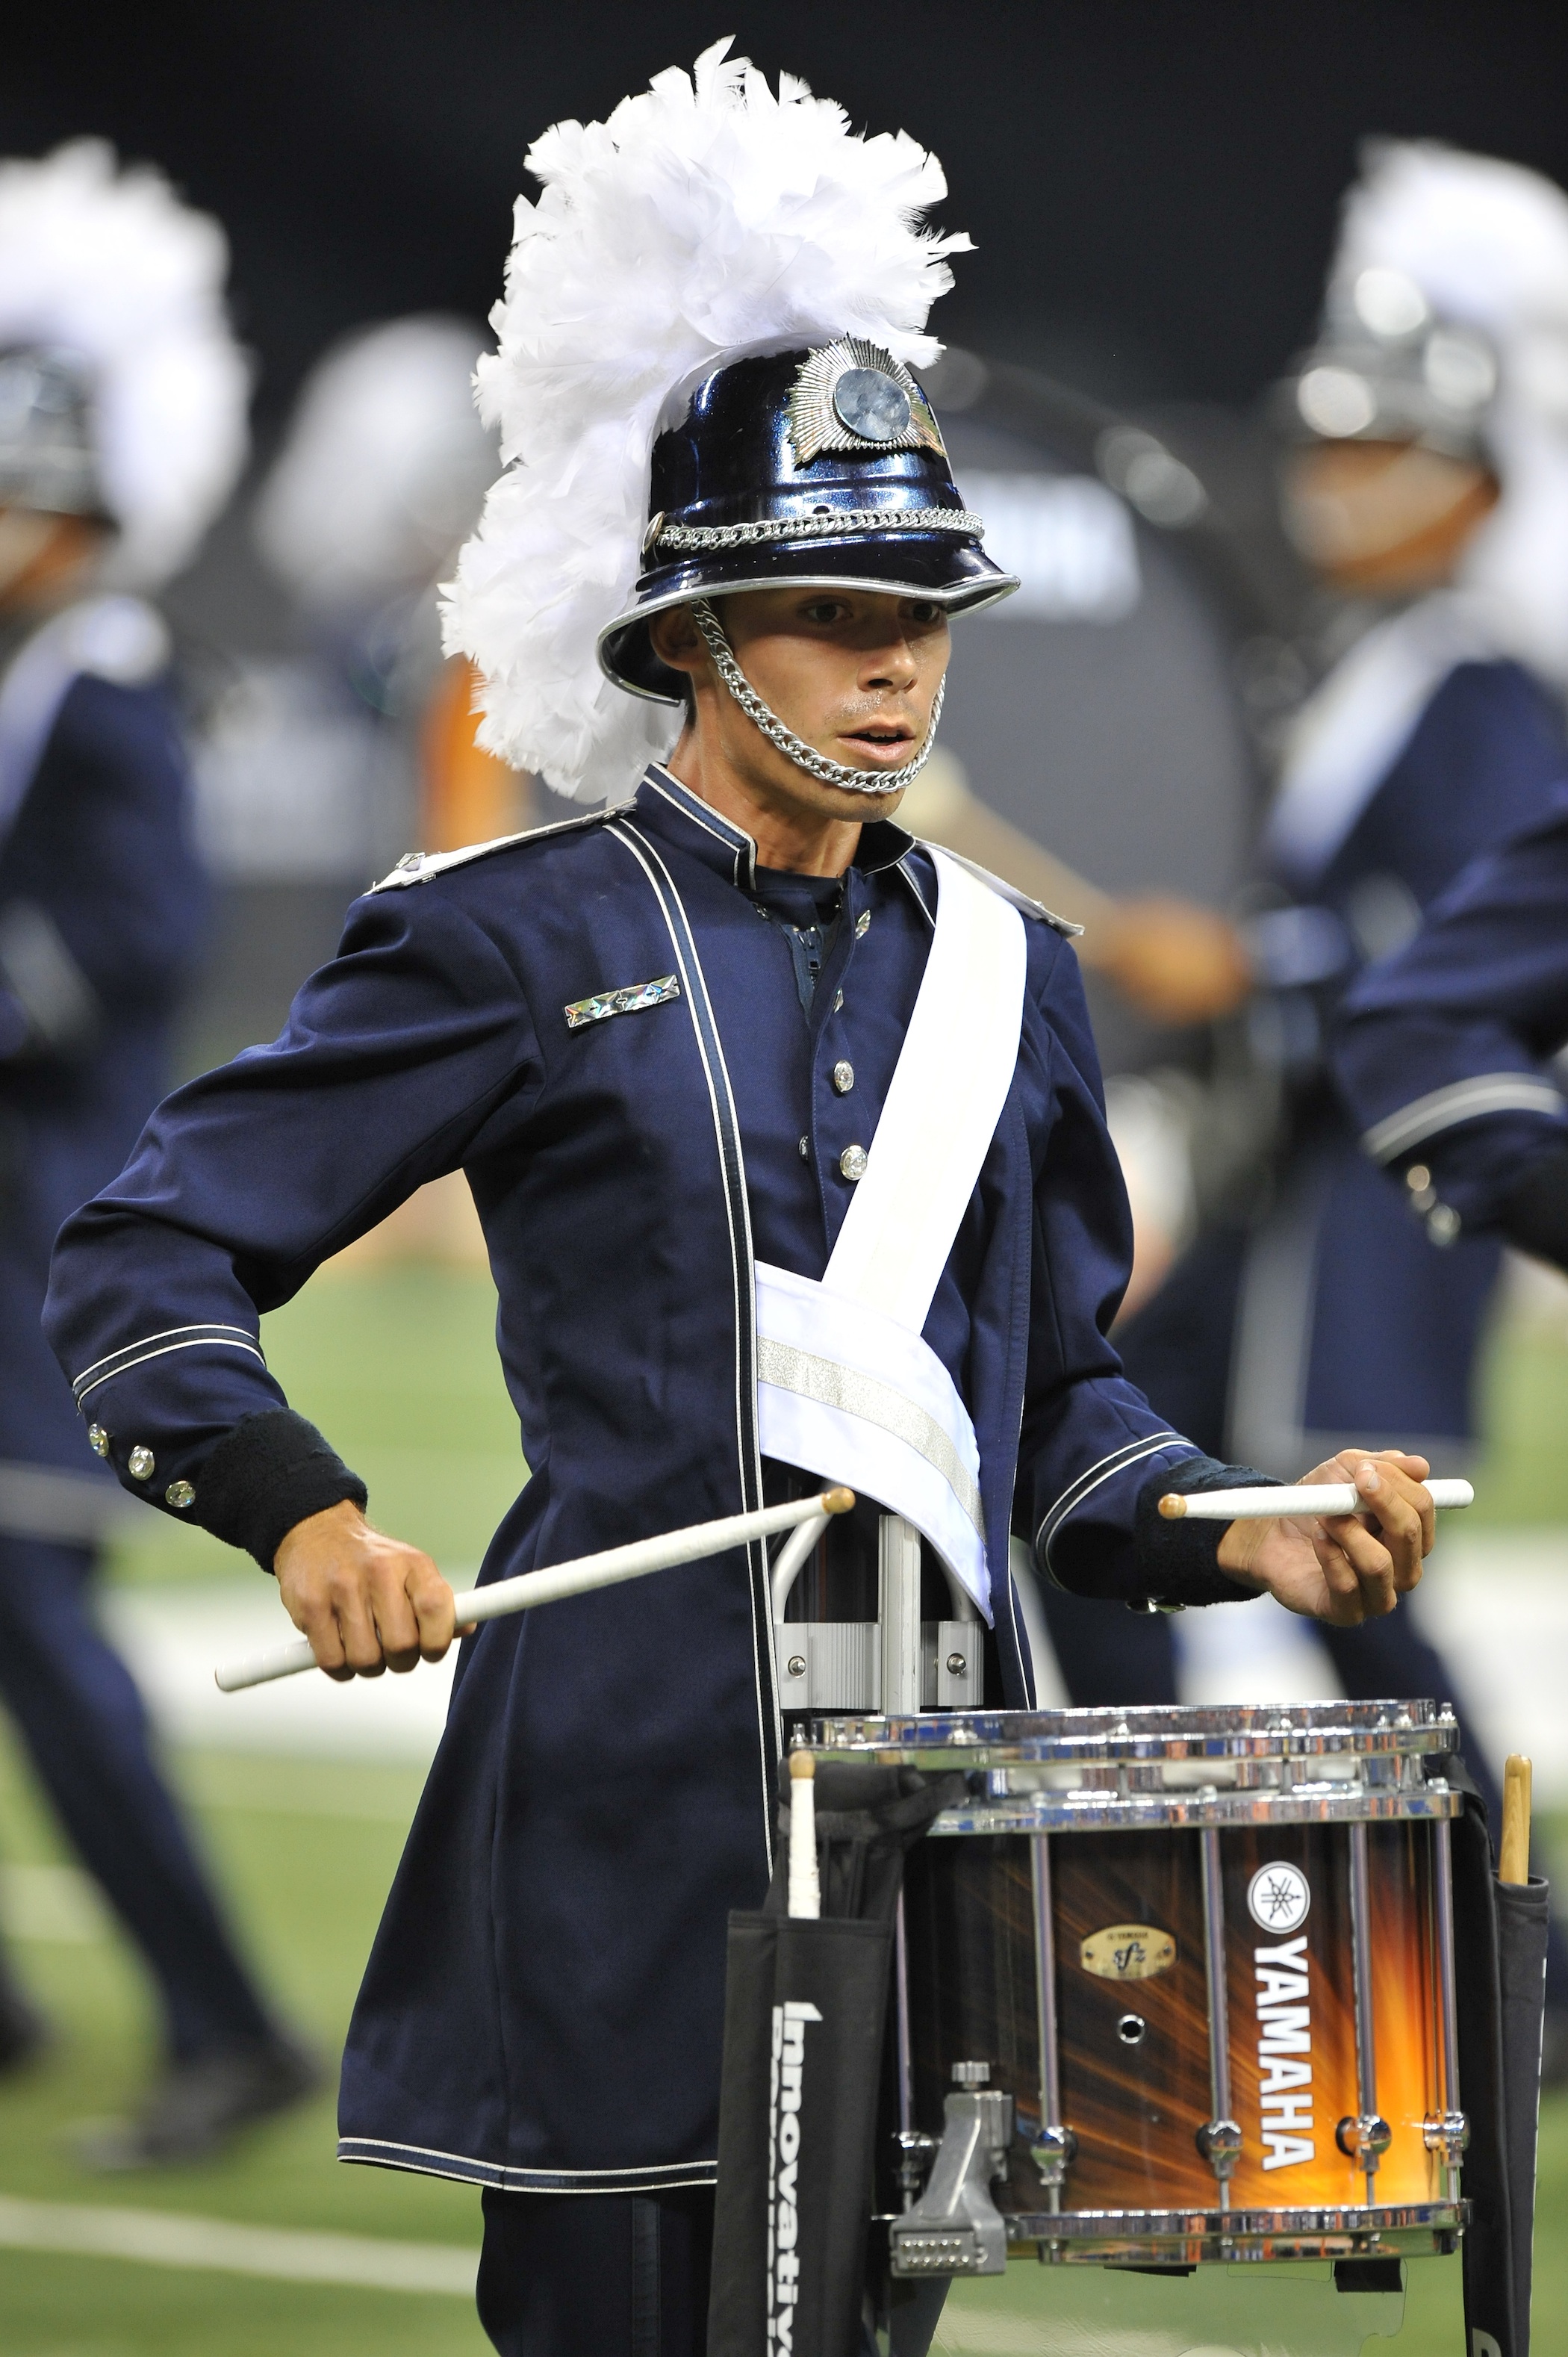 Yamaha Celebrates Years Of Excellence At Dci Championship